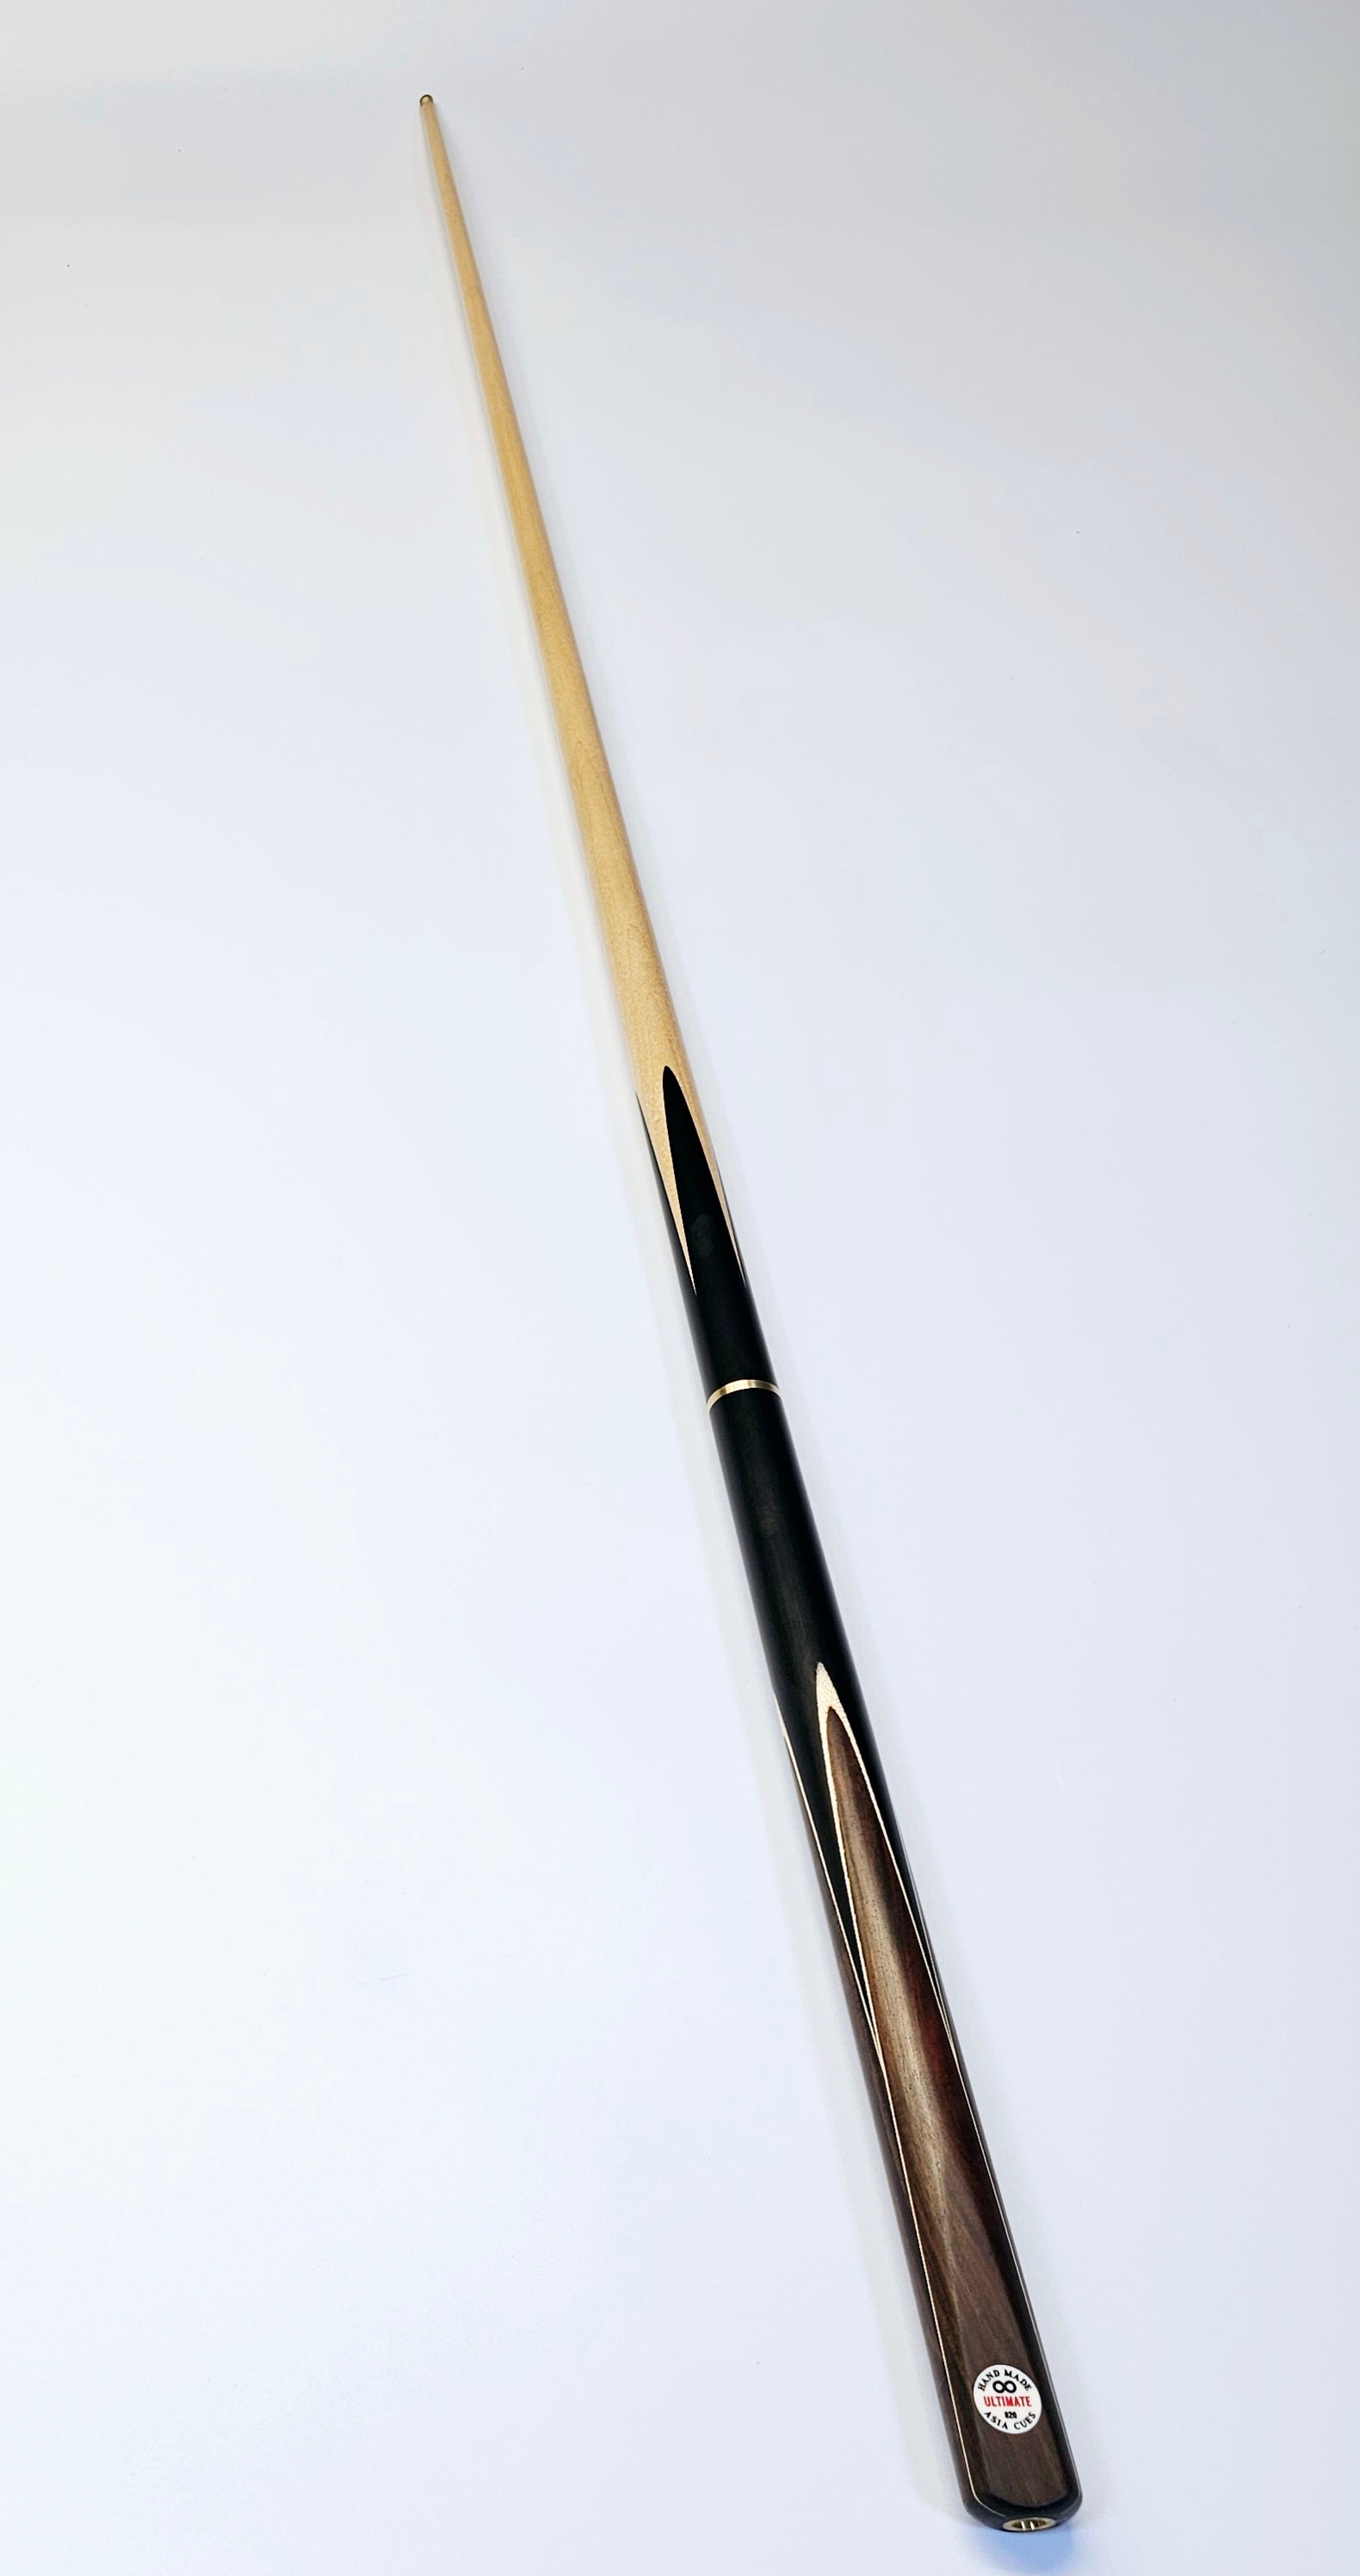 Asia Cues Ultimate No.820  - 3/4 Jointed Snooker Cue 9.4mm Tip, 17.7oz, 57.5"